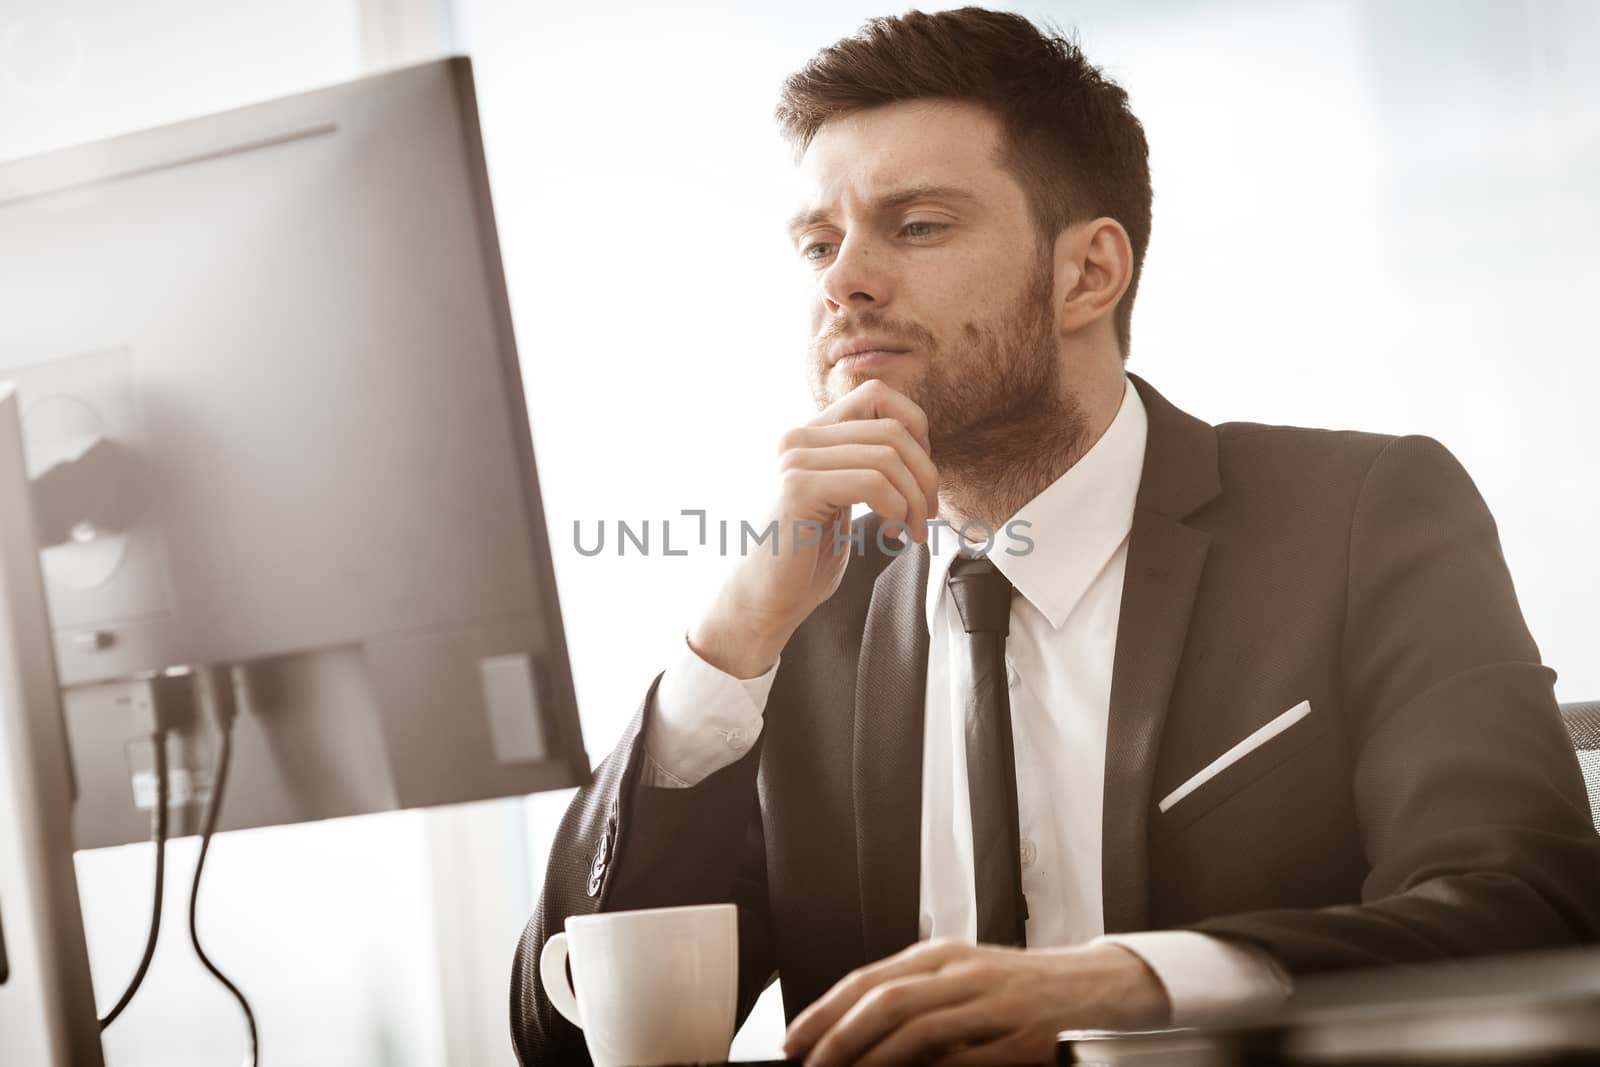 Business crisis concept. Young businessman sitting at the office table busy talking on a cell phone resolving a very serious work problem. Man in suit indoors on glass window background.